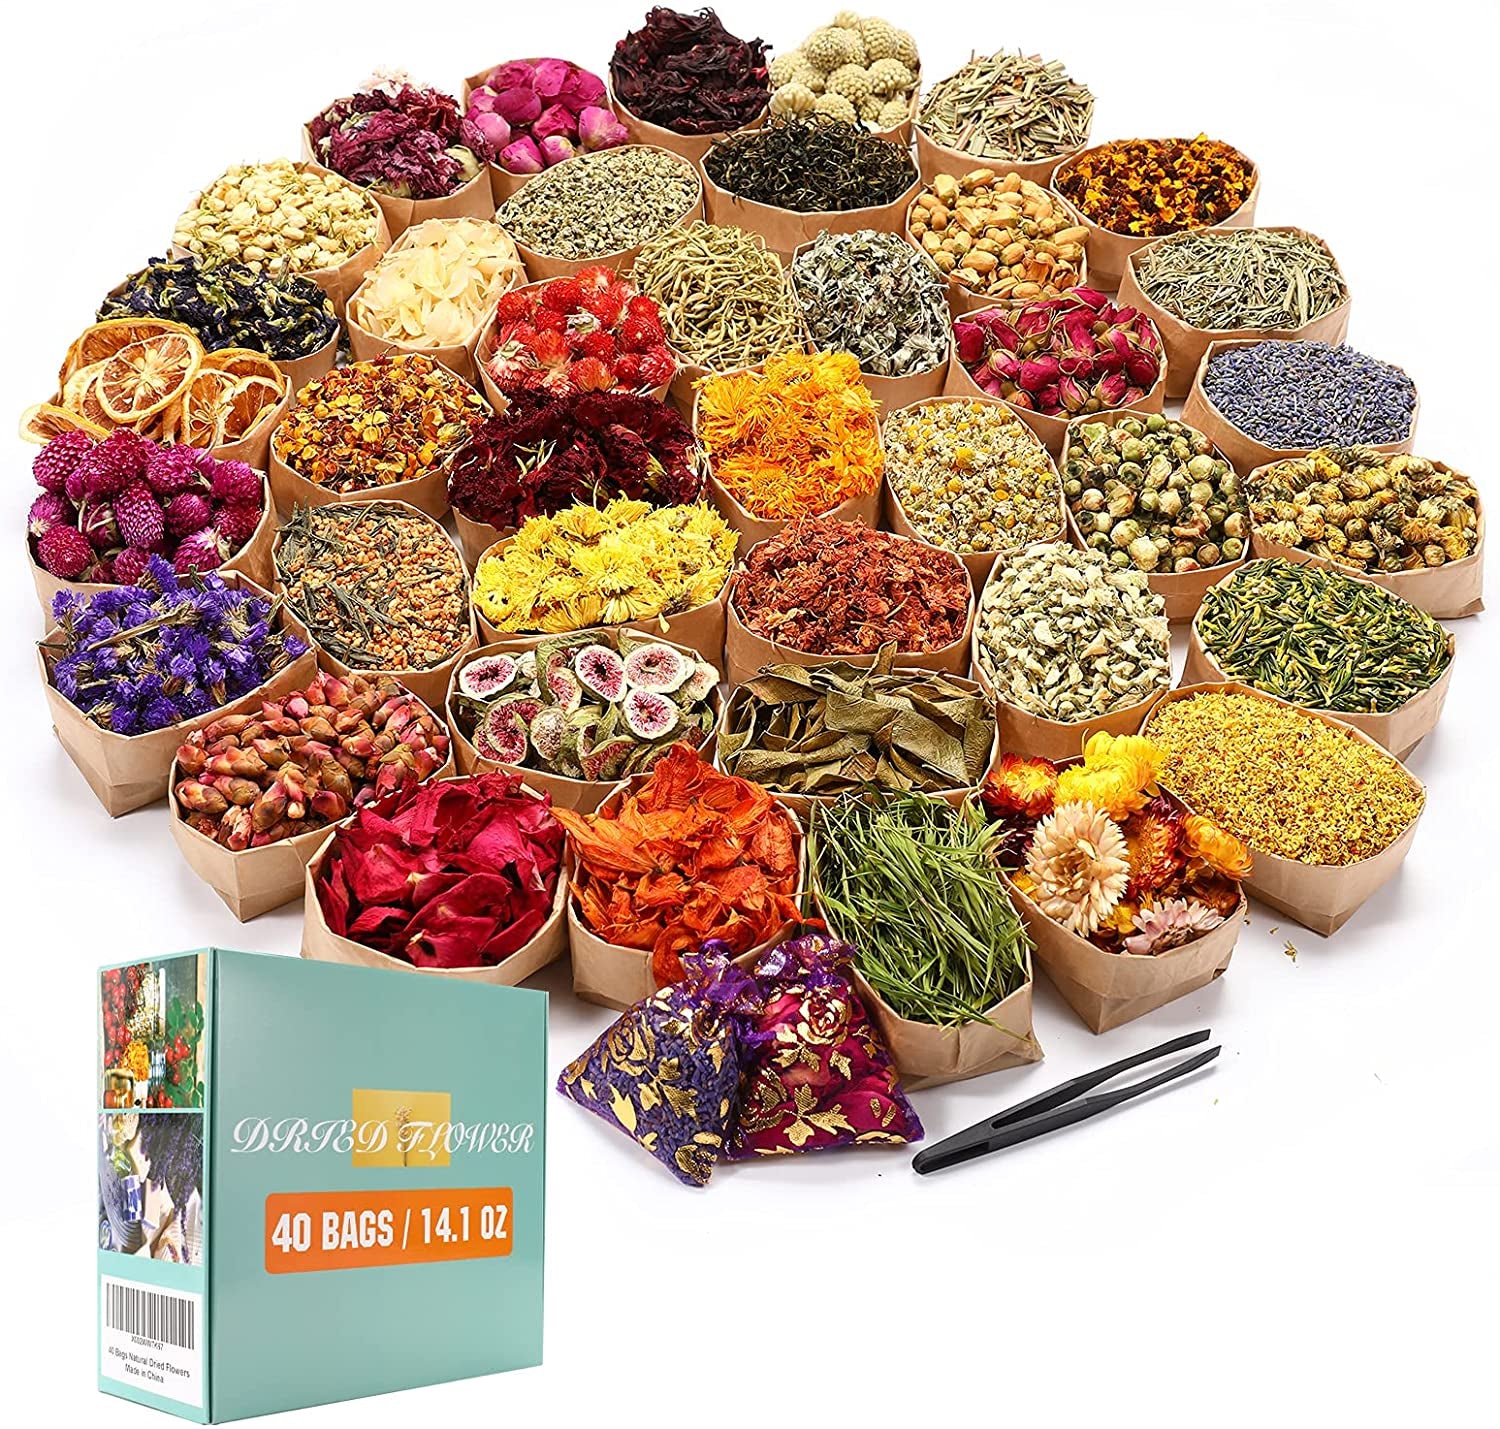 24 Bags Dried Flowers,100% Natural Dried Flowers Herbs Kit for Soap Making, DIY Candle Making,Bath - Include Rose Petals,Lavender,Don'T Forget Me,Lilium,Jasmine,Rosebudsand More